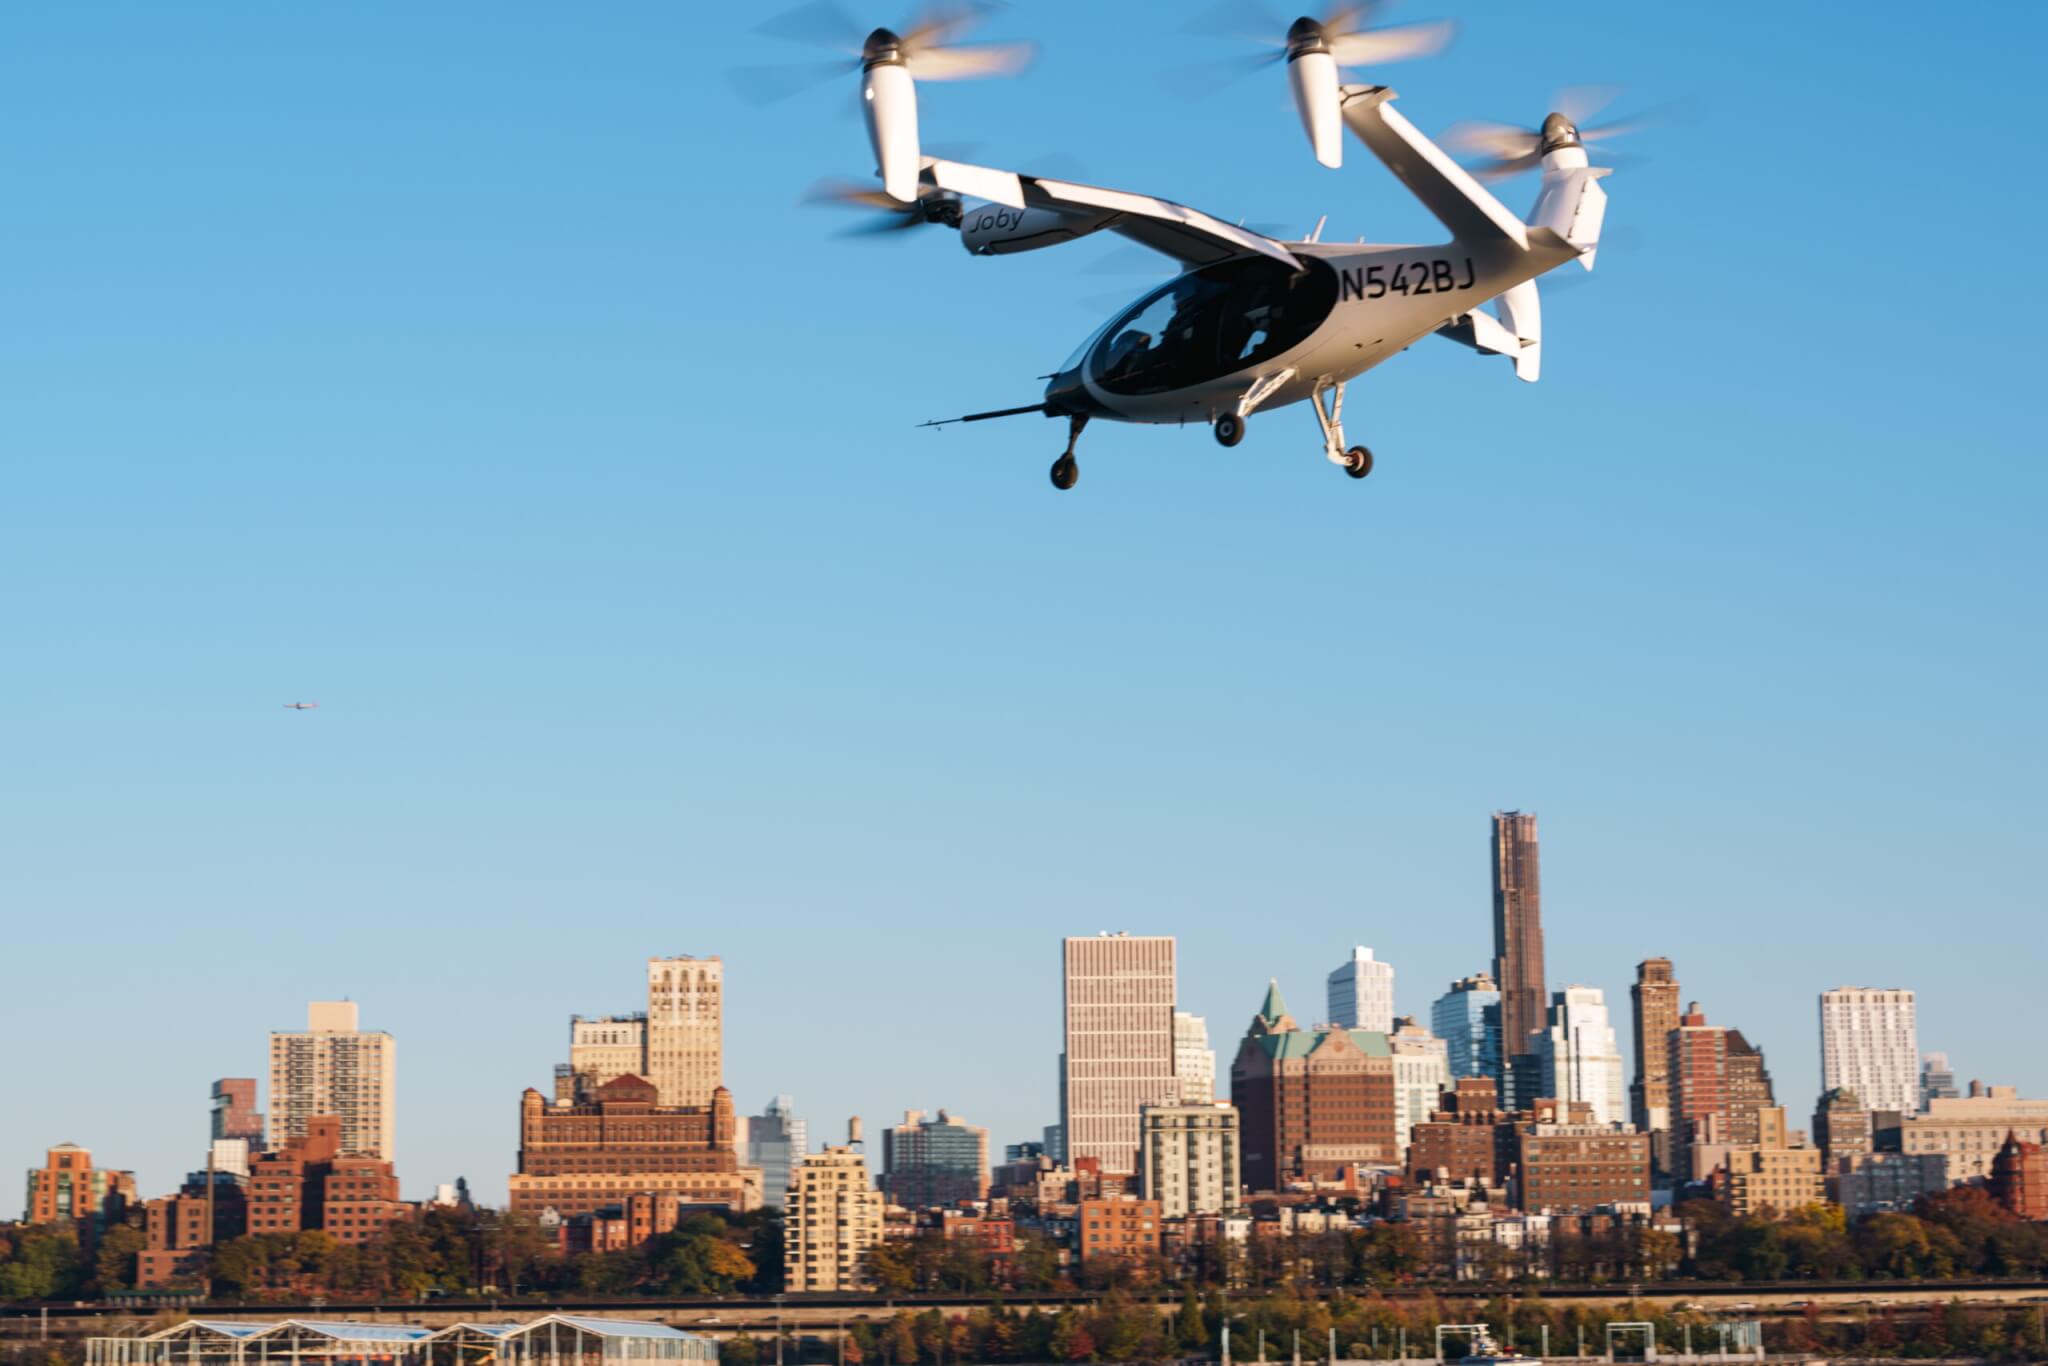 The Joby Aviation aircraft performs first ever electric air taxi flight over New York City.